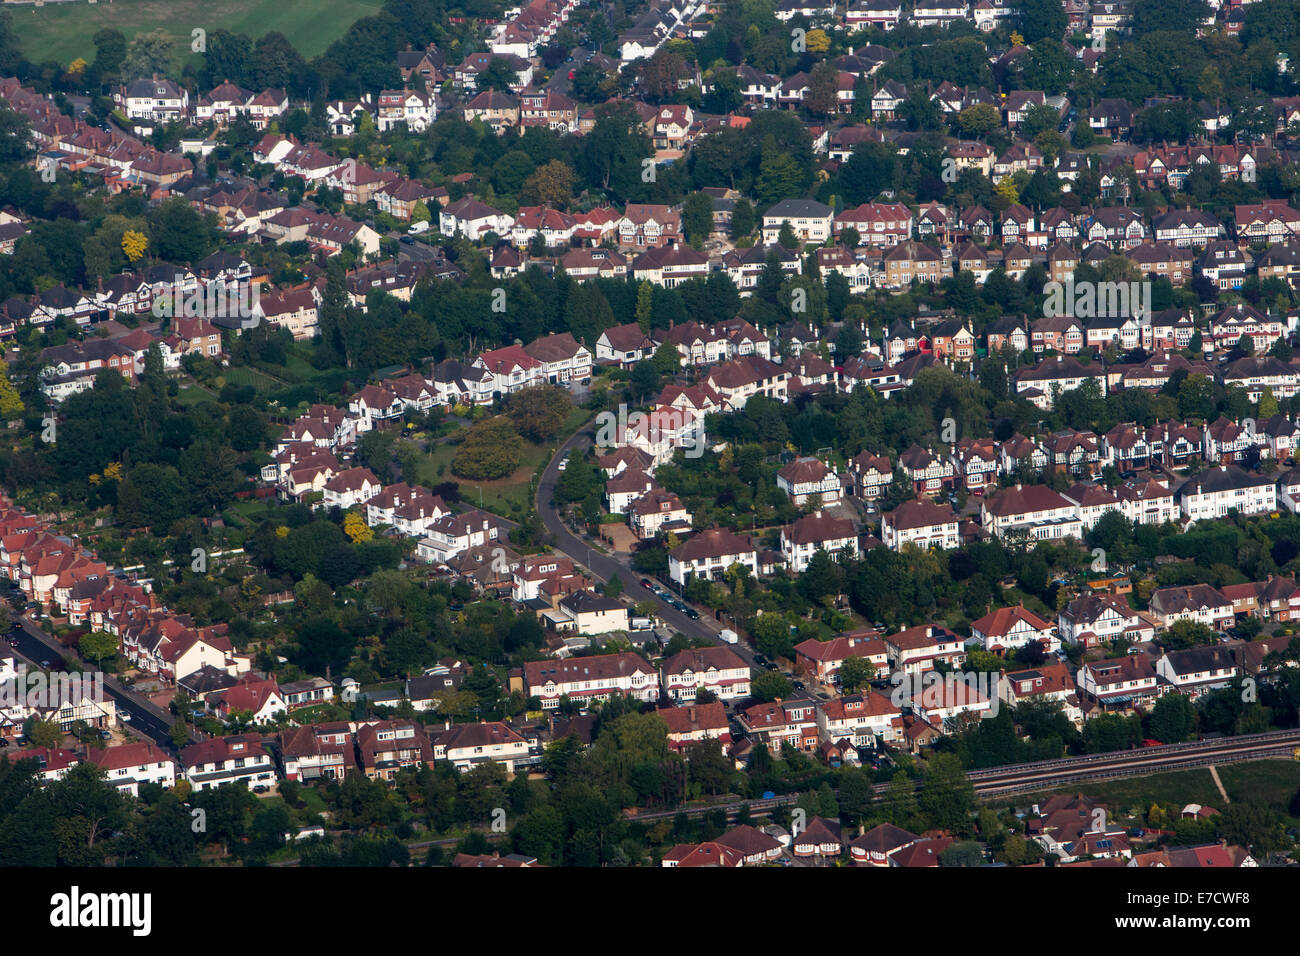 Aerial view of suburban housing in England showing showing streets and greenery Stock Photo